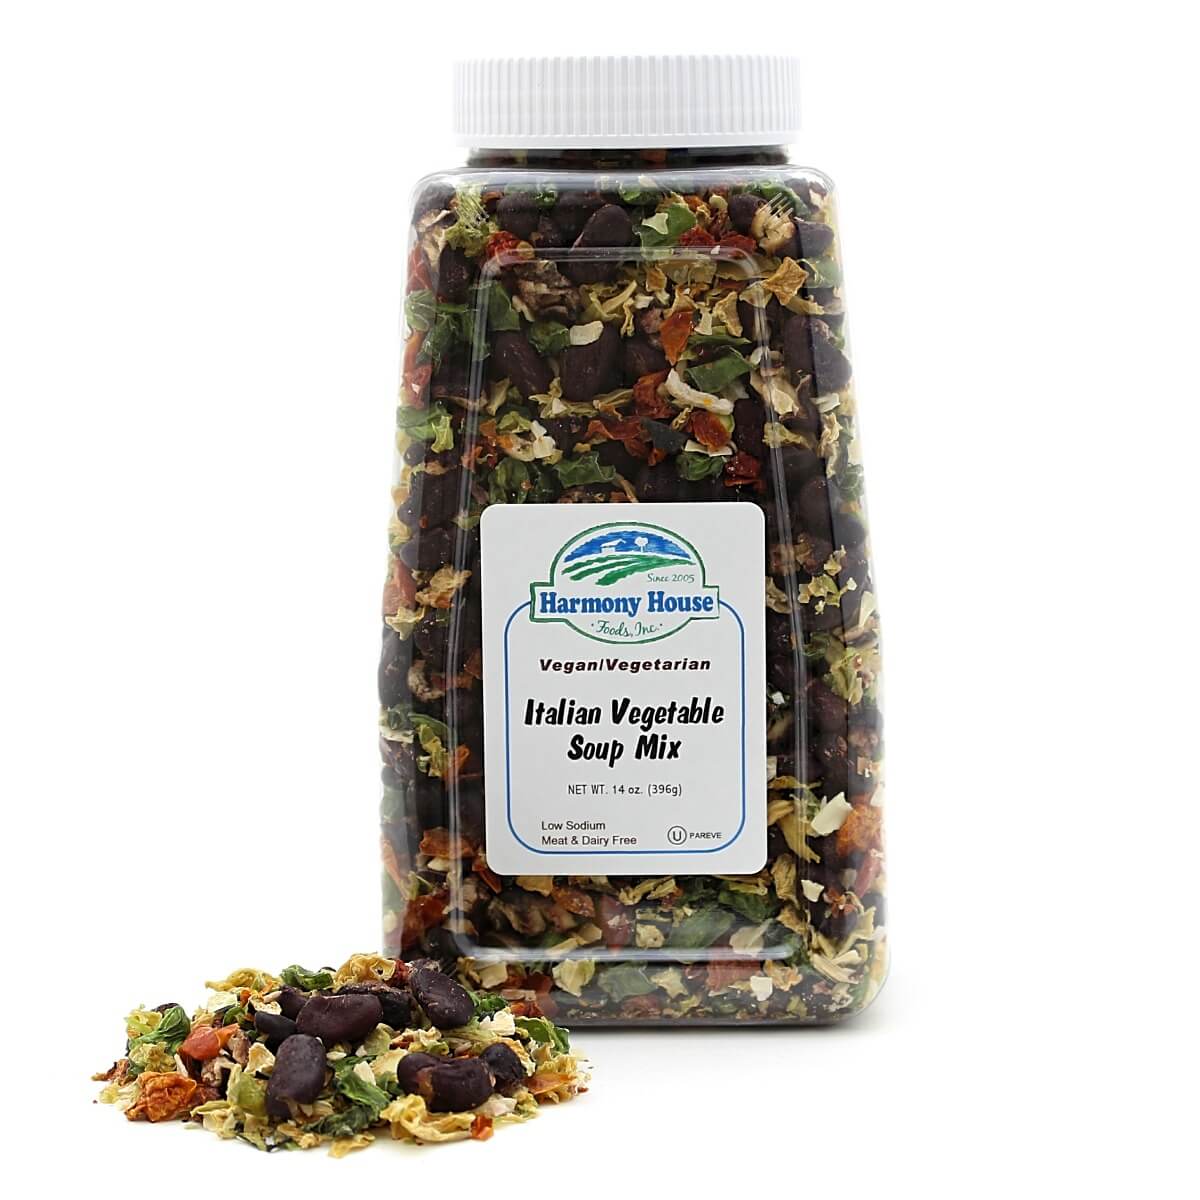 A jar of vegetable body mix - Harmony House Italian Vegetable Soup Mix - on a white background.